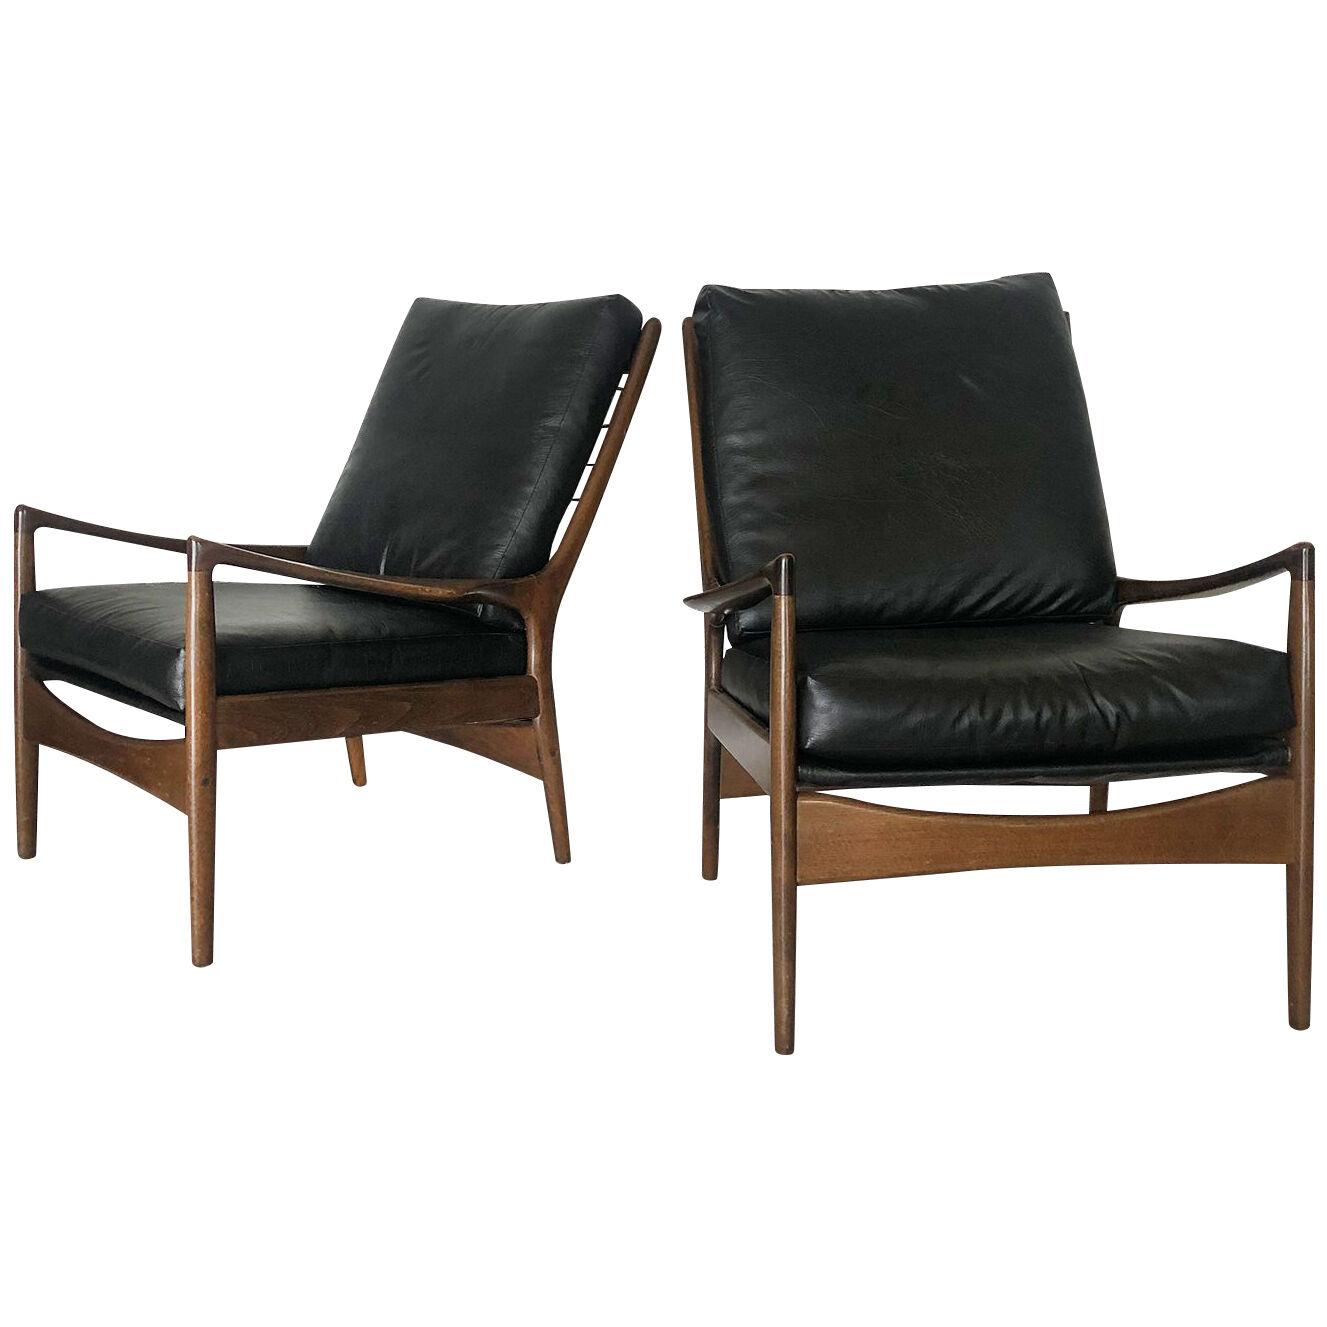 A Pair of Ib Kofod-Larsen Armchairs For Selig, c1960